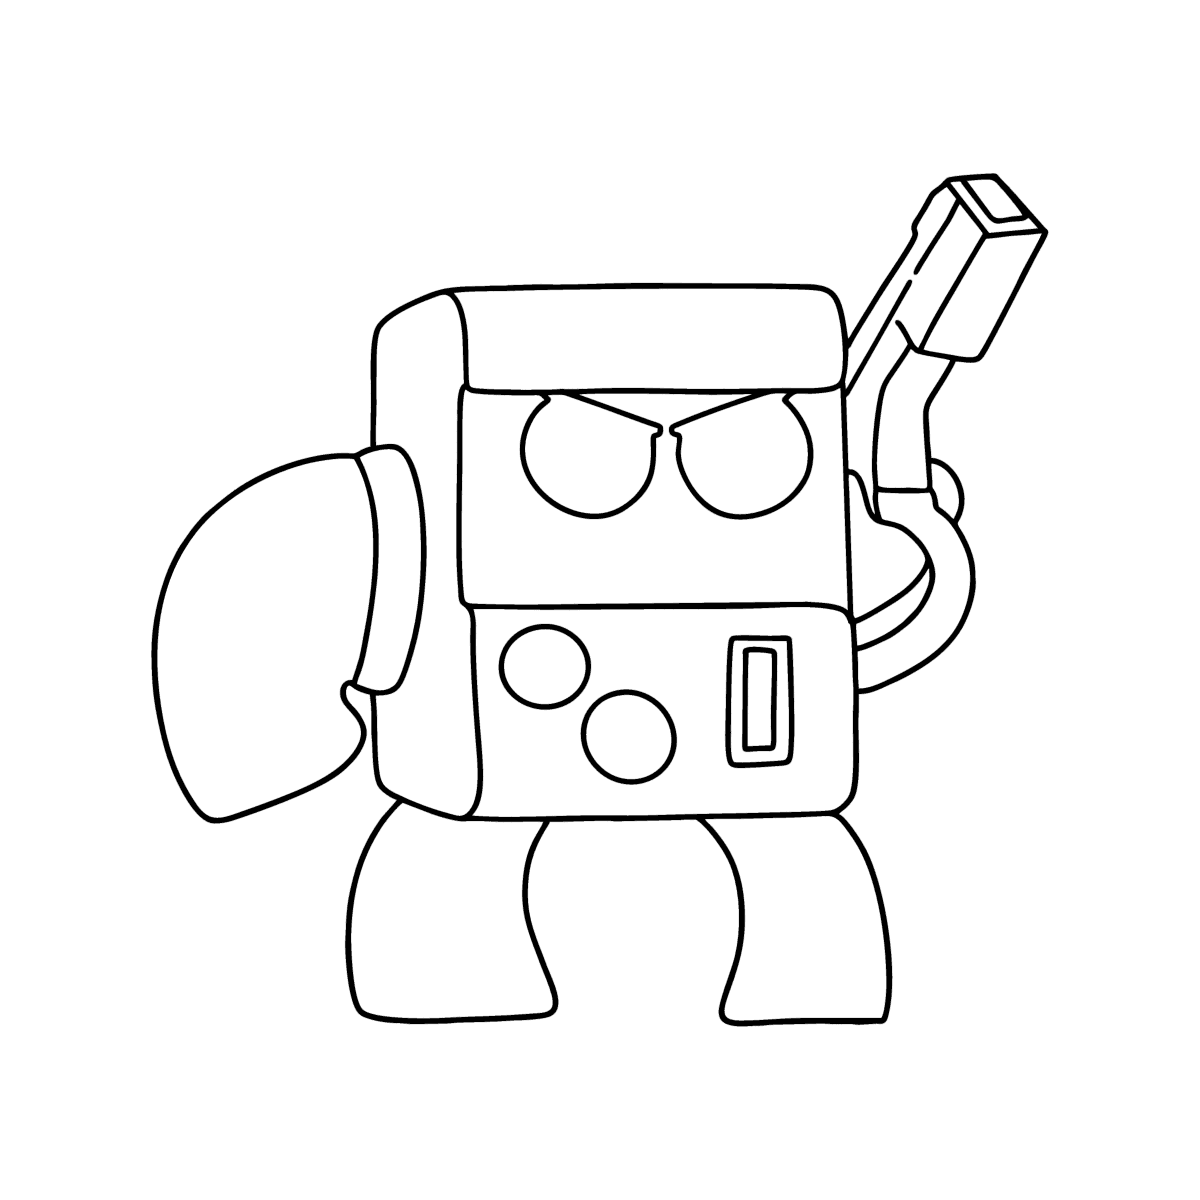 Brawl Stars coloring pages - Download, Print, and Color Online!